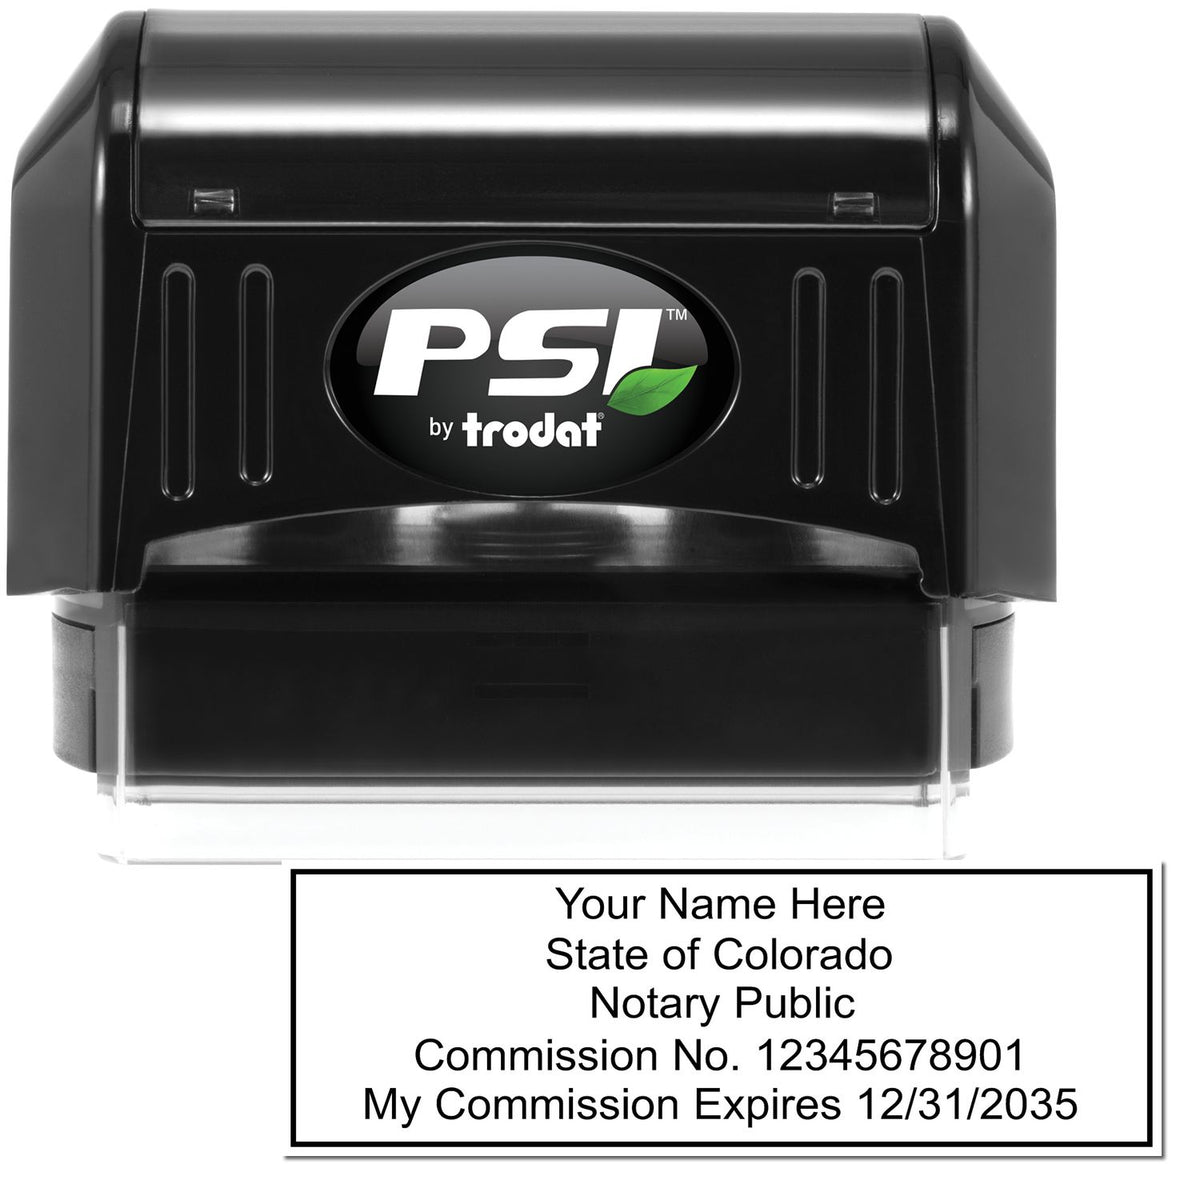 The main image for the PSI Colorado Notary Stamp depicting a sample of the imprint and electronic files